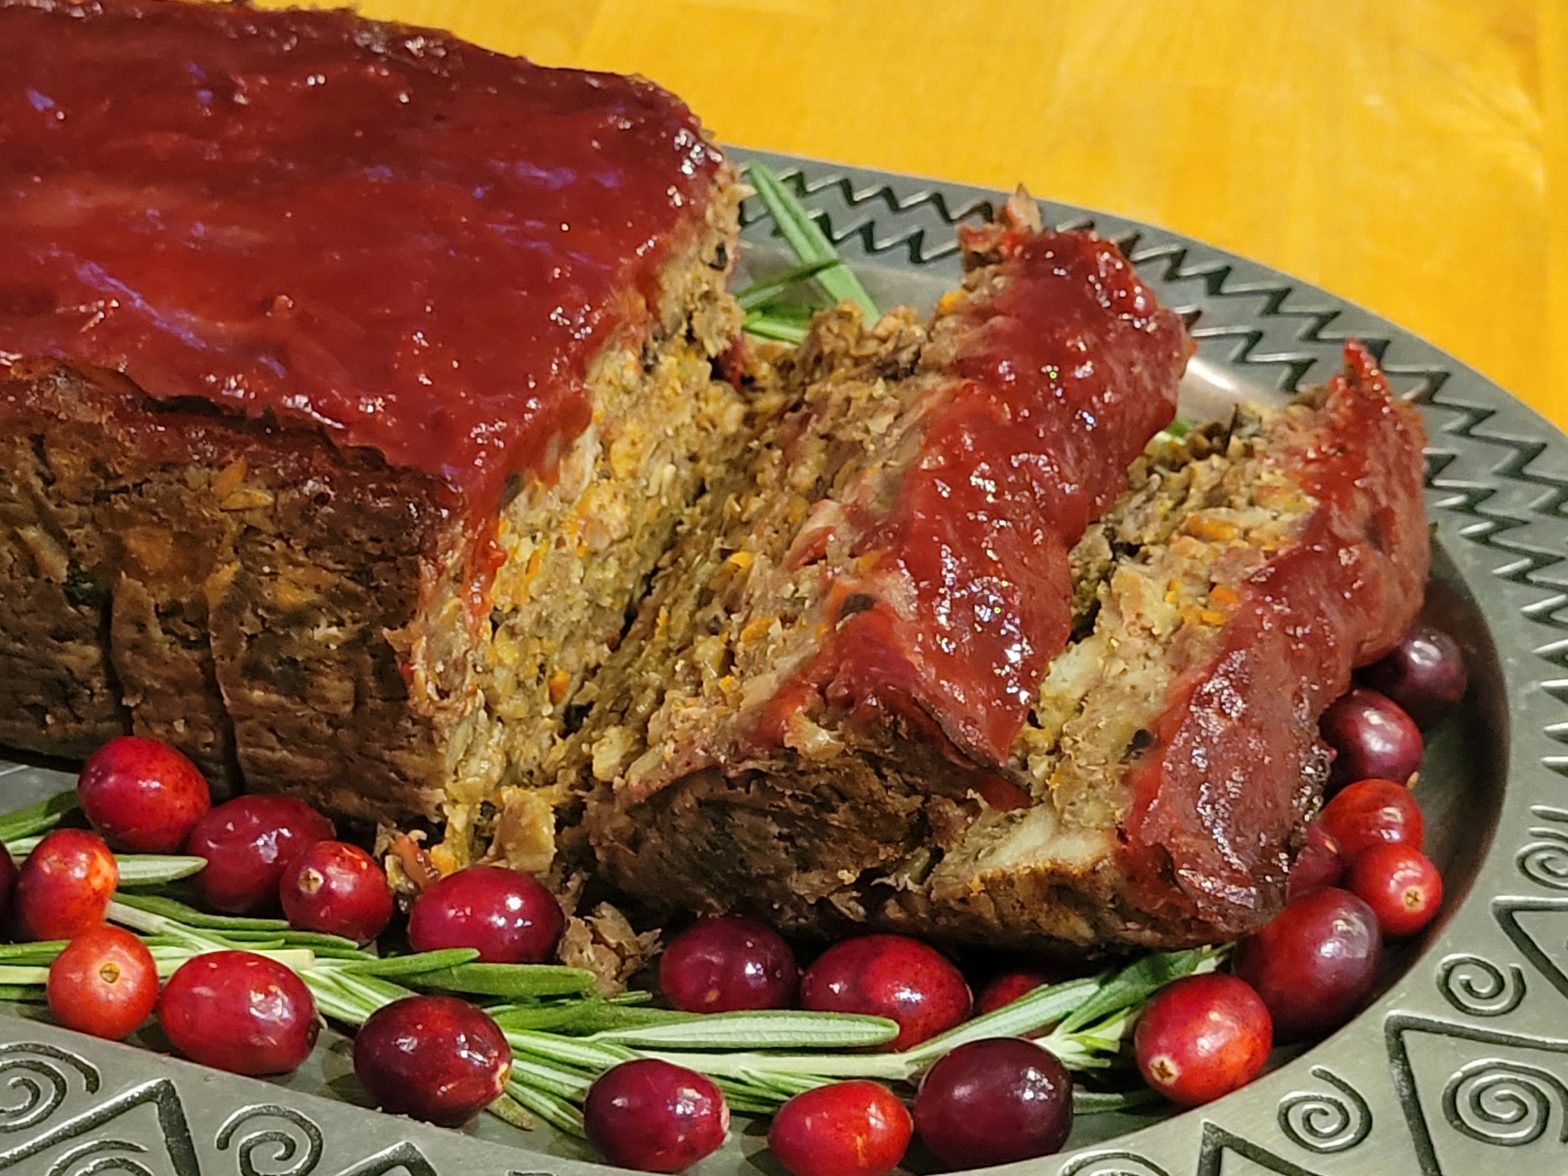 Baked lentil loaf with glaze on platter with fresh rosemary sprigs and whole cranberries